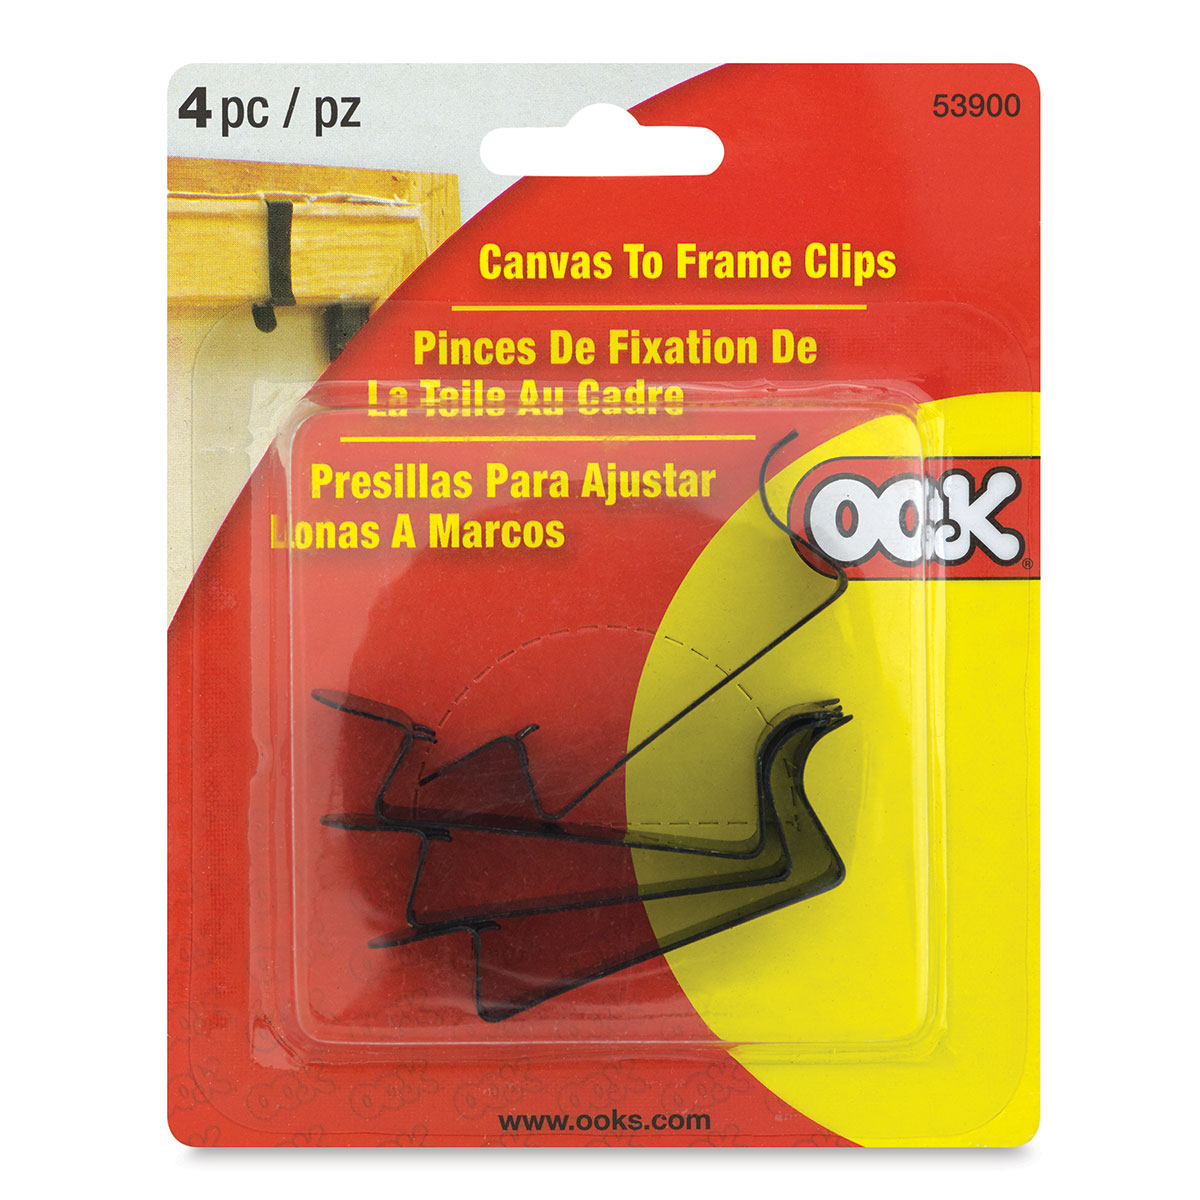 Ook Canvas to Frame Clips